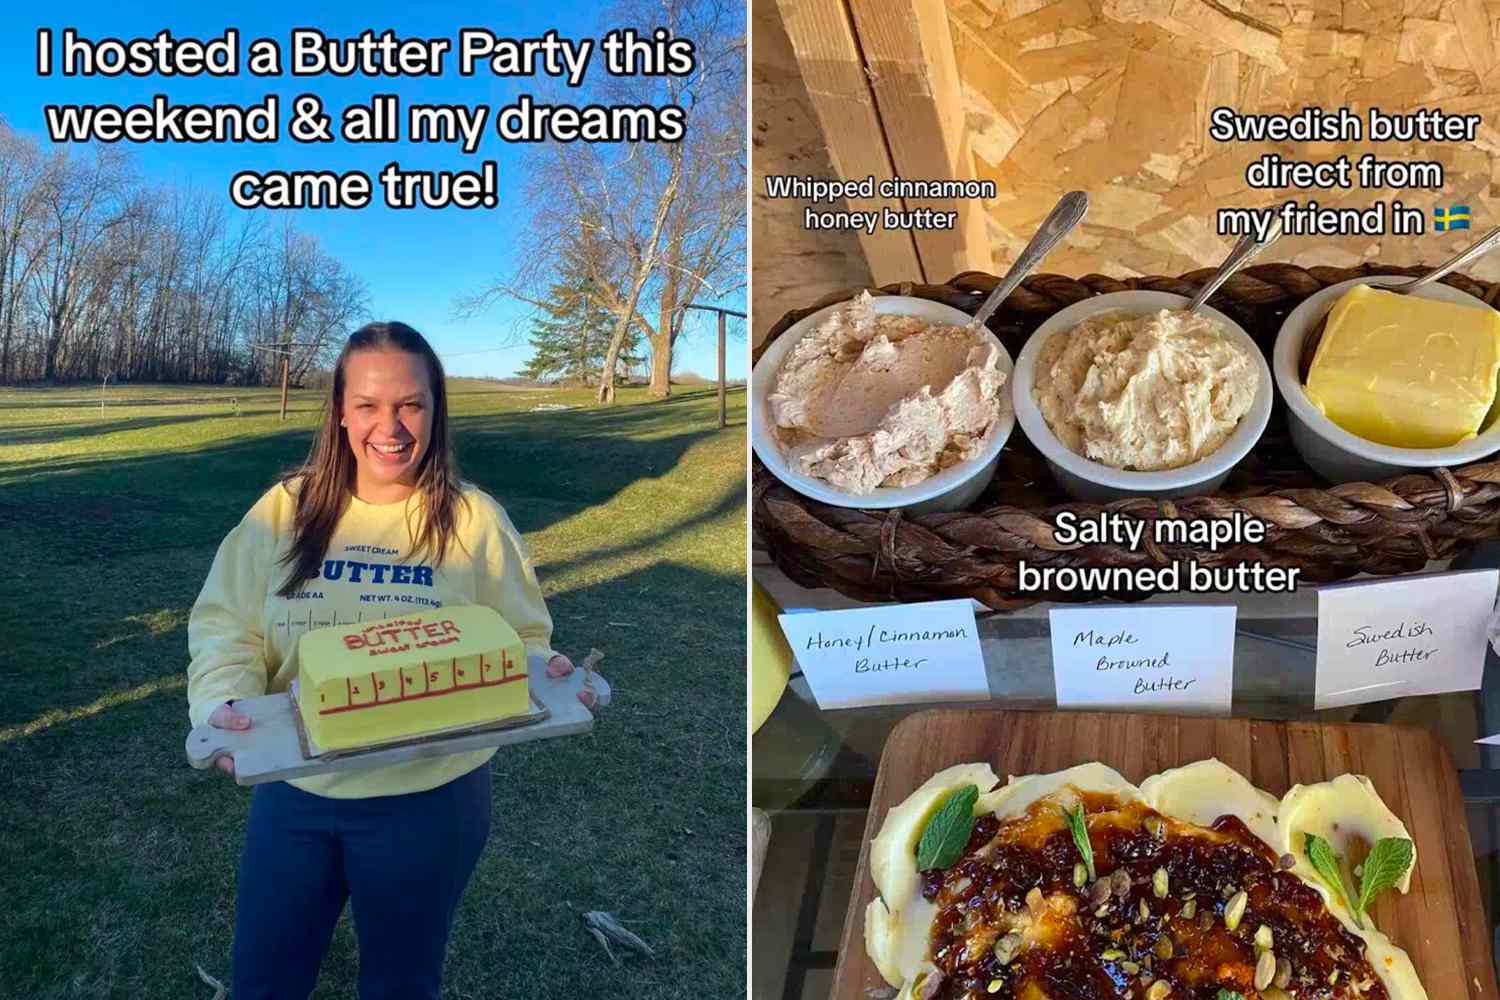 Woman's Butter-Themed Birthday Party Goes Viral for 'Wildly Indulgent' Treats (Exclusive)